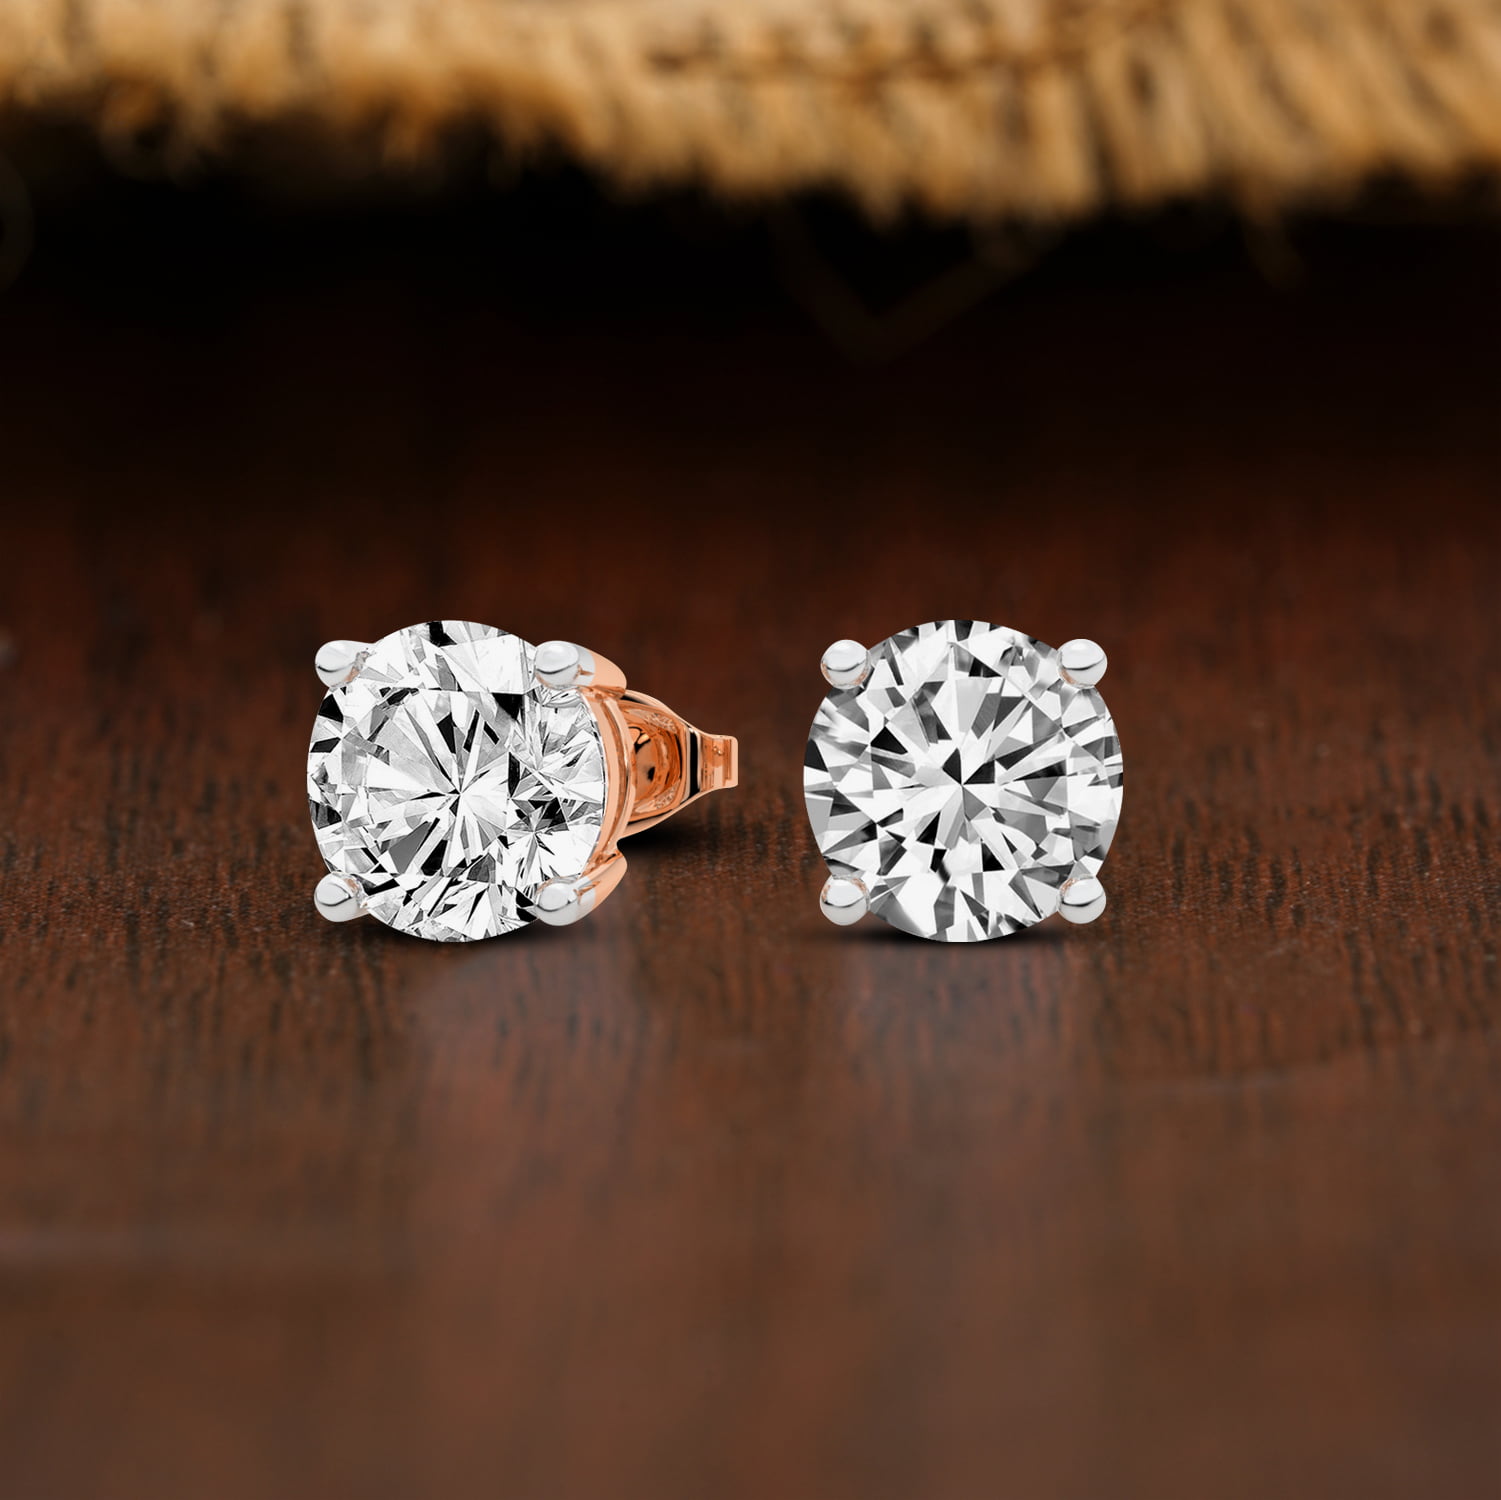 Tiffany Solitaire Diamond Stud Earrings Review 